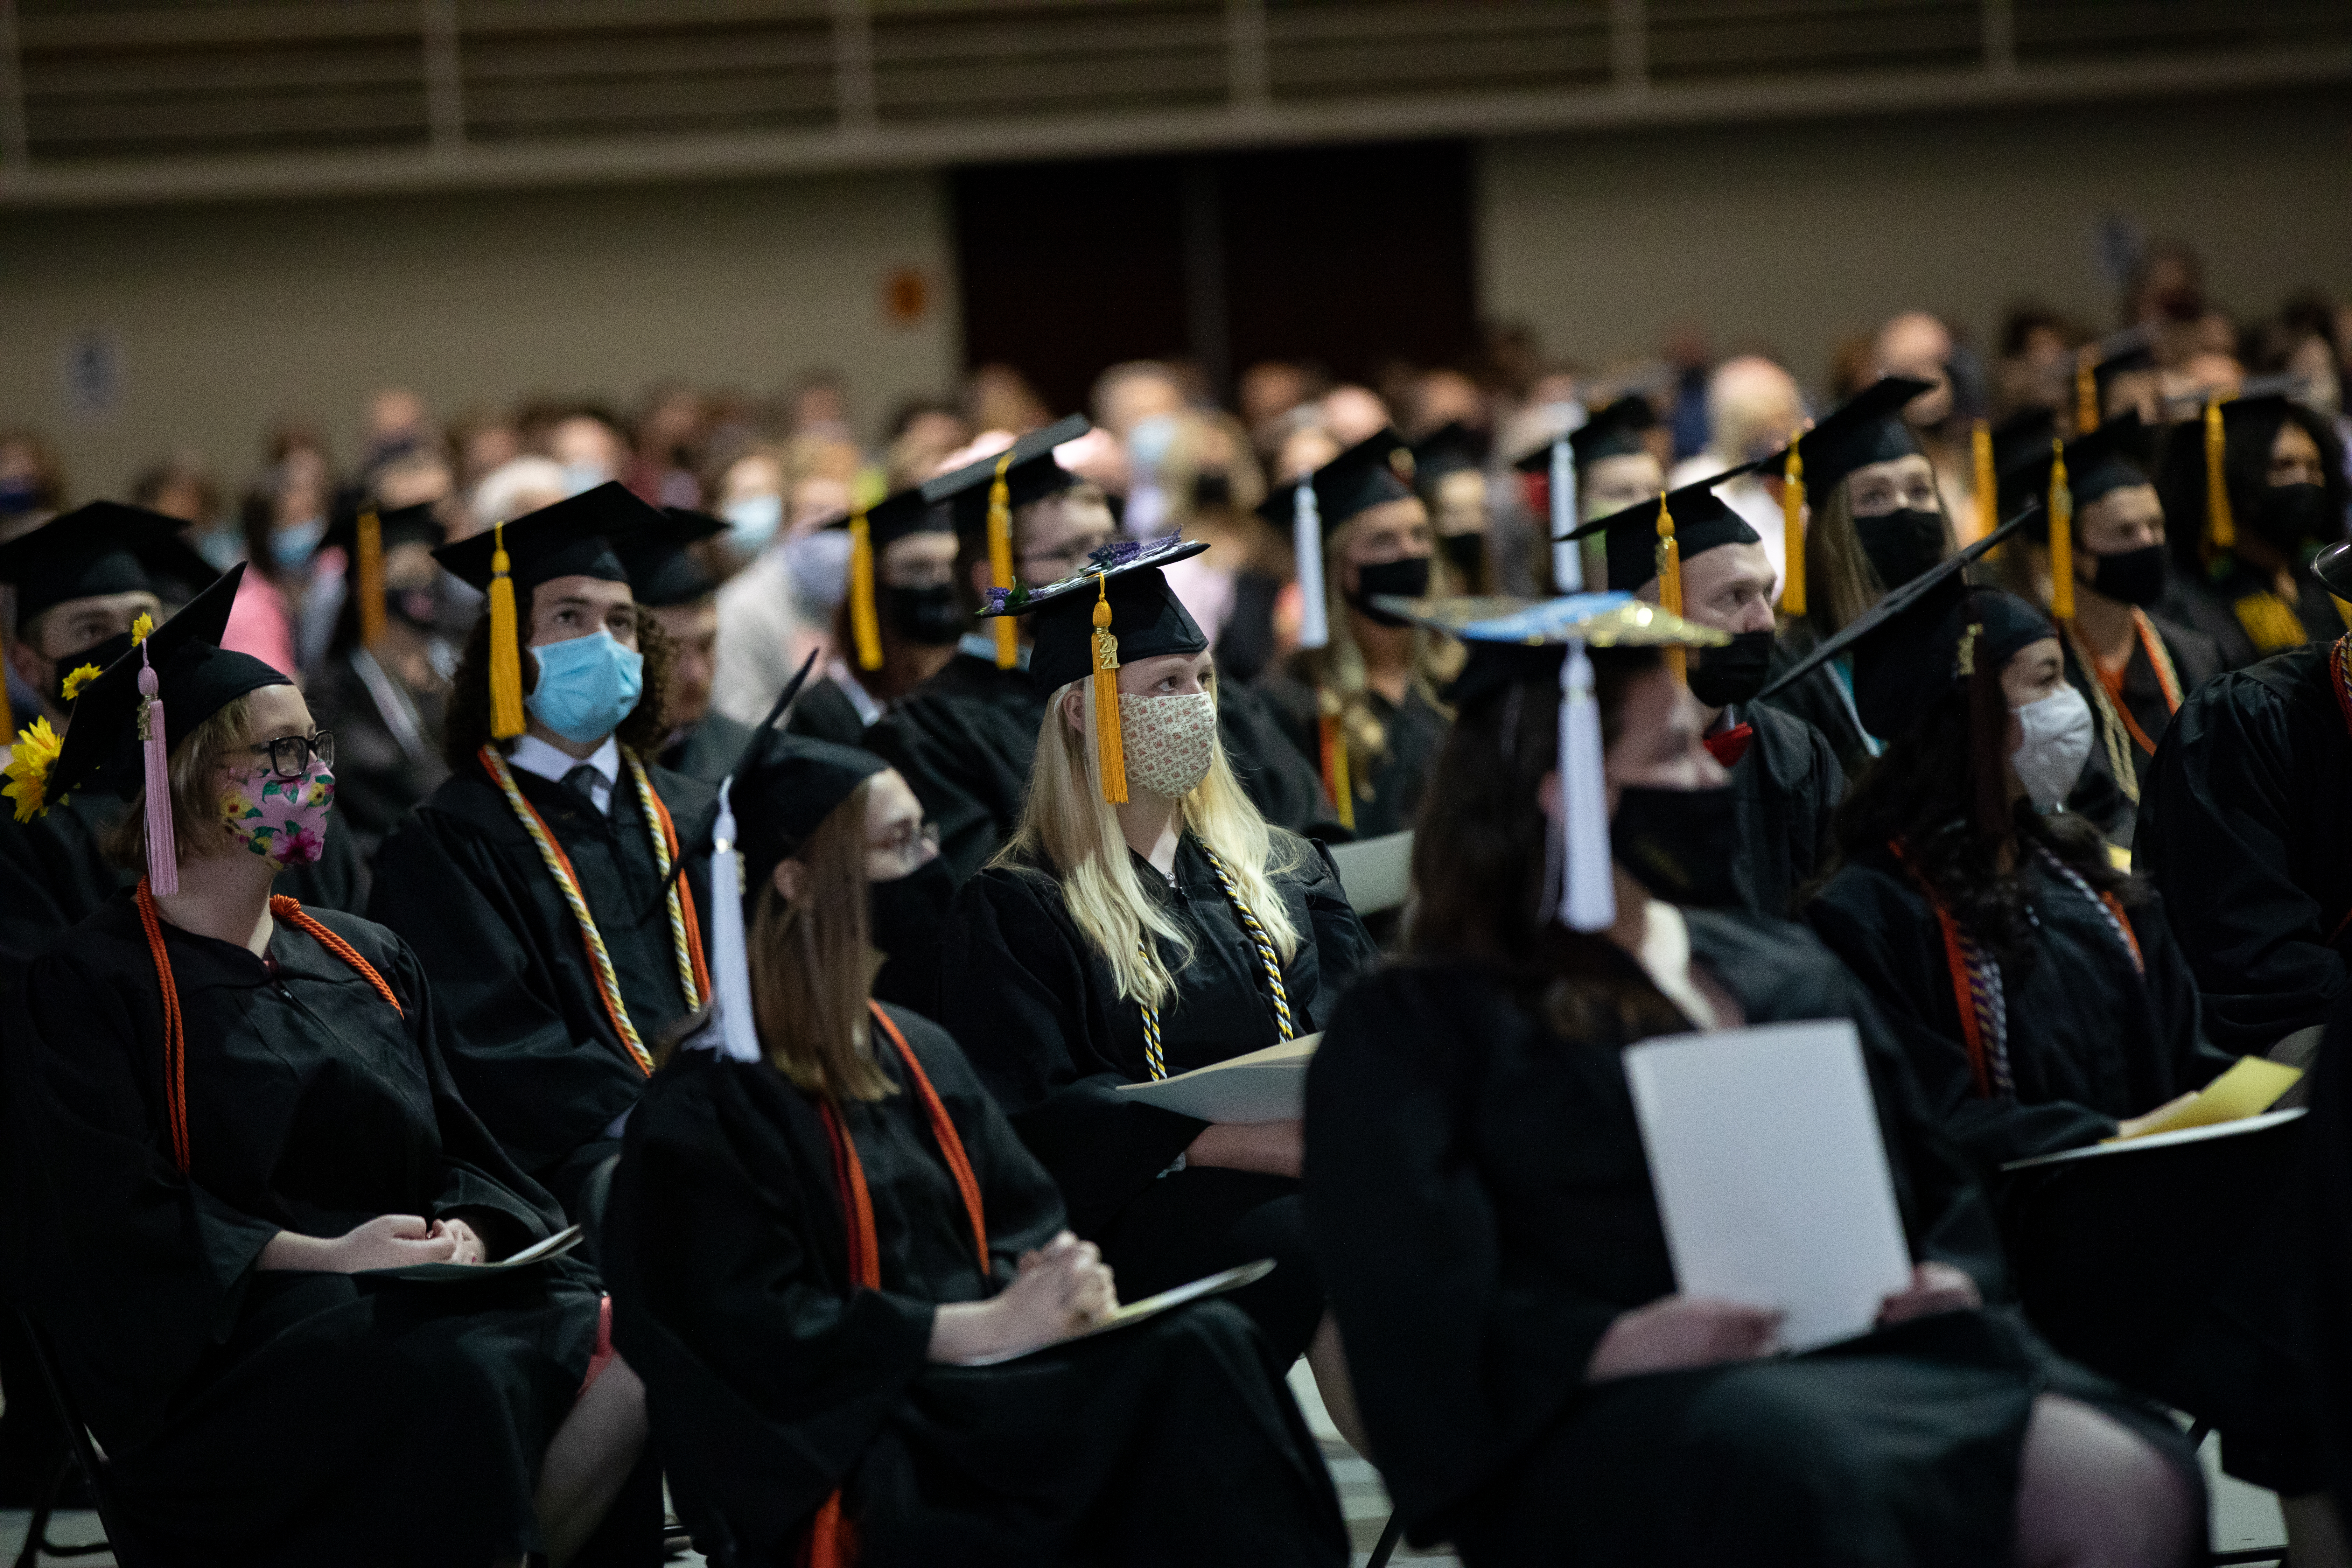 ONU cancelled commencement in May 2020 due to the pandemic, but celebrated 2020 and 2021 graduates in May 2021